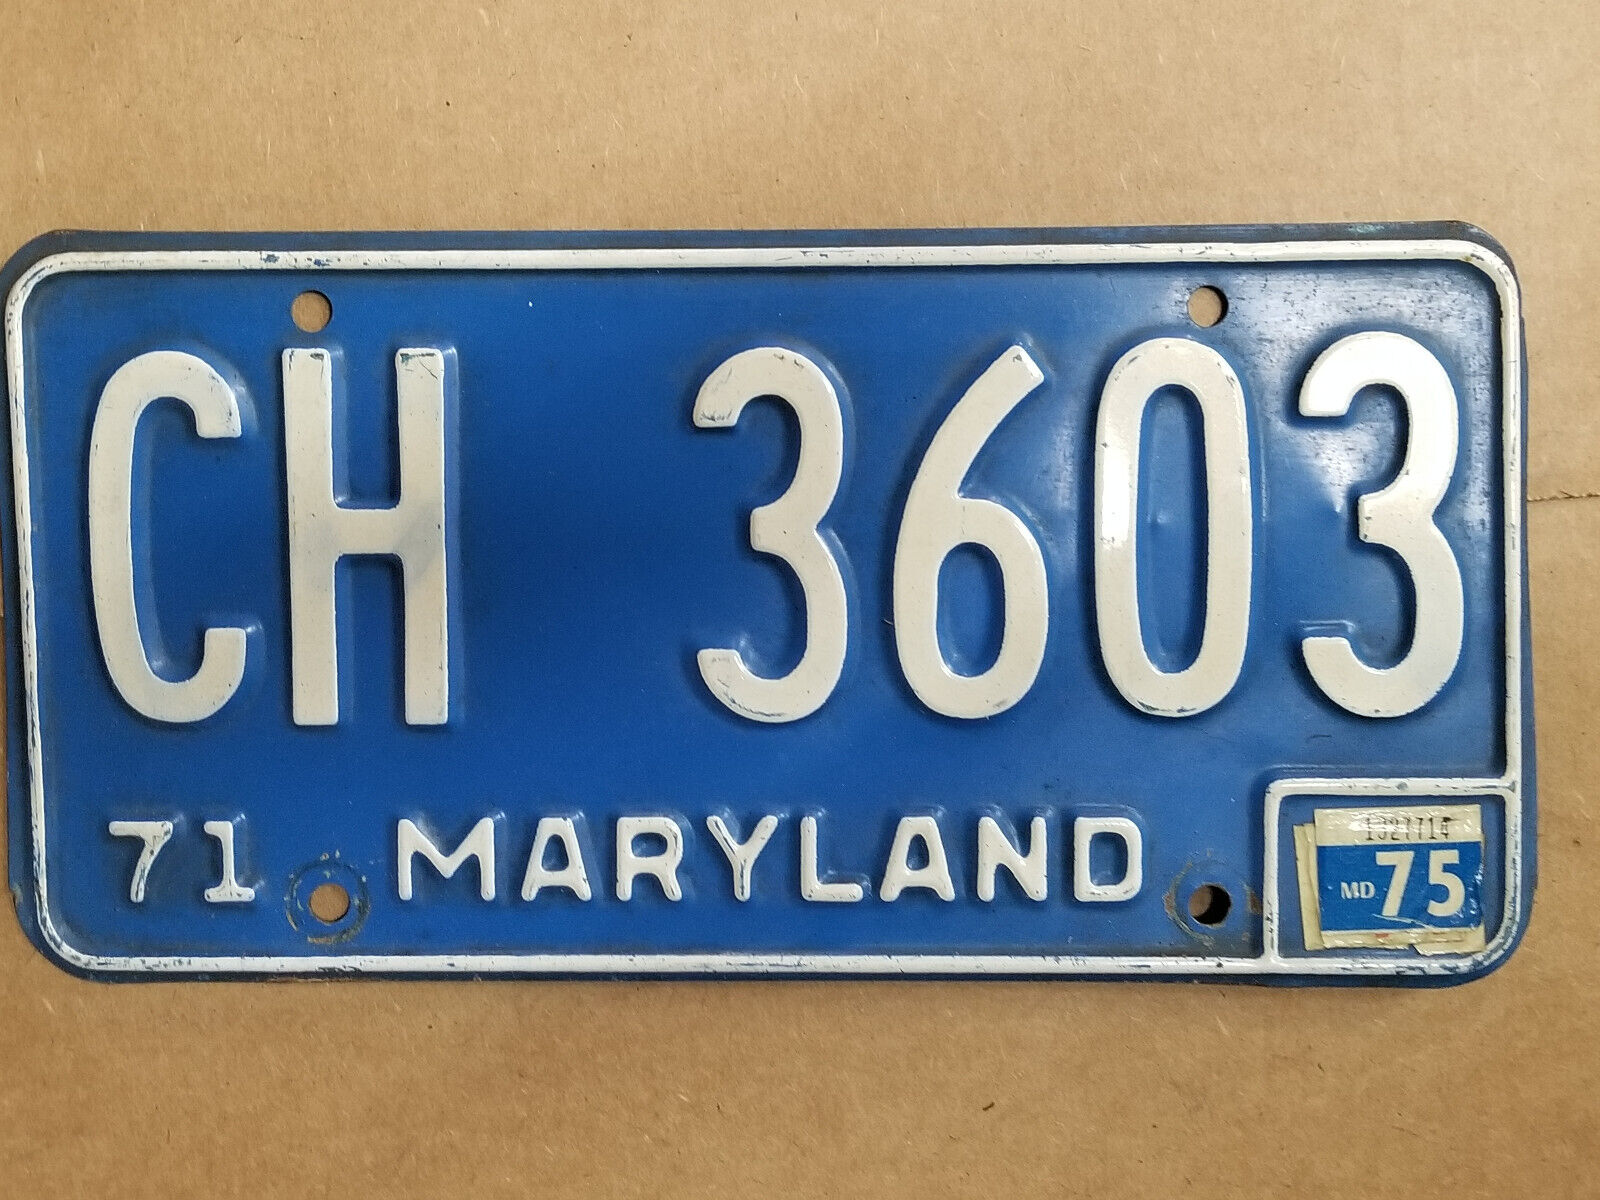 Vintage 1971 Maryland License Plate CH 3603 Blue & White Expired Plate